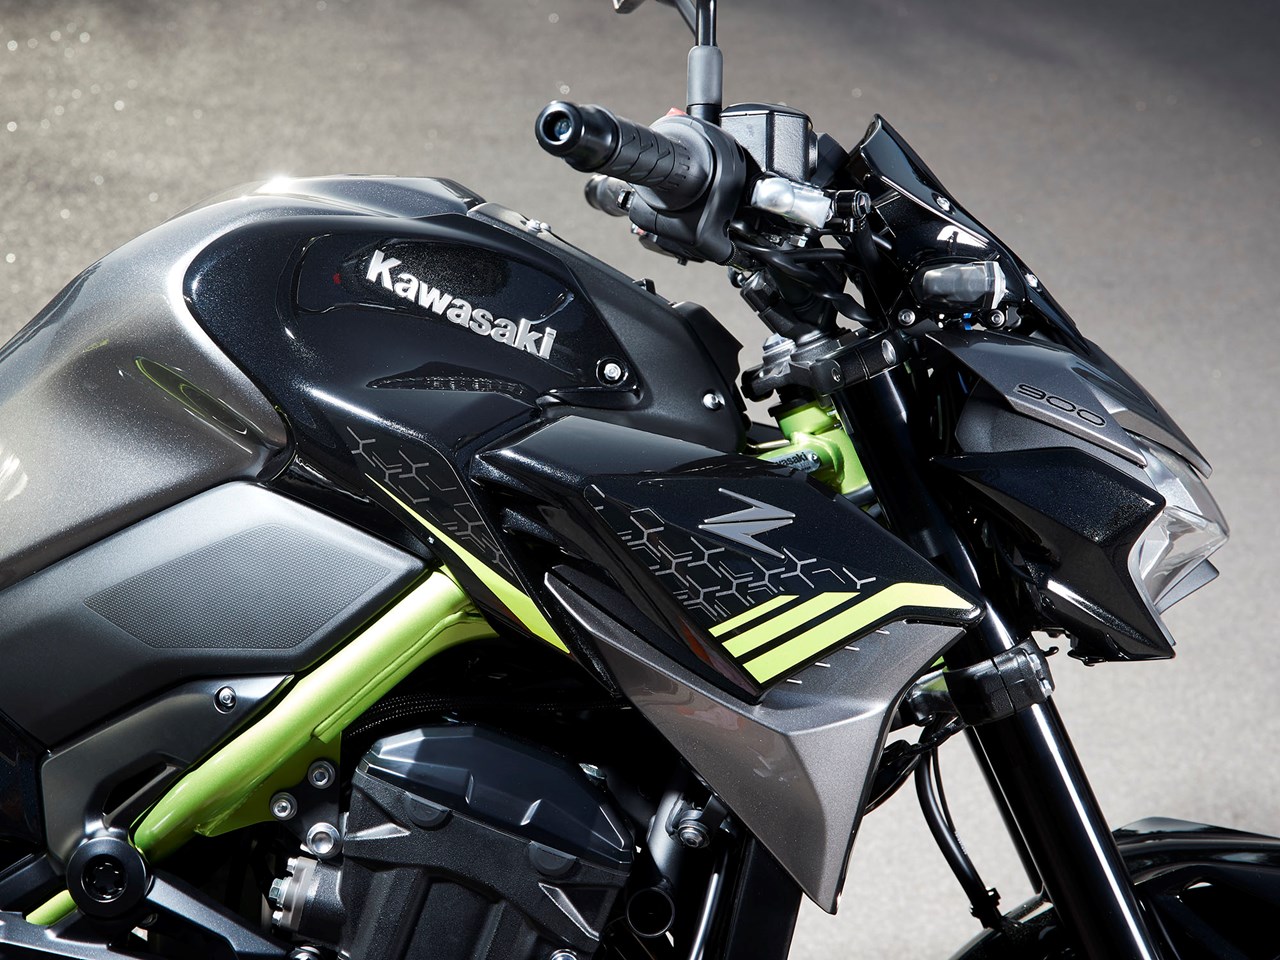 Suitable for Kawasaki Z900 TPU transparent headlight protection film,  smoked black tail light film, color changing film